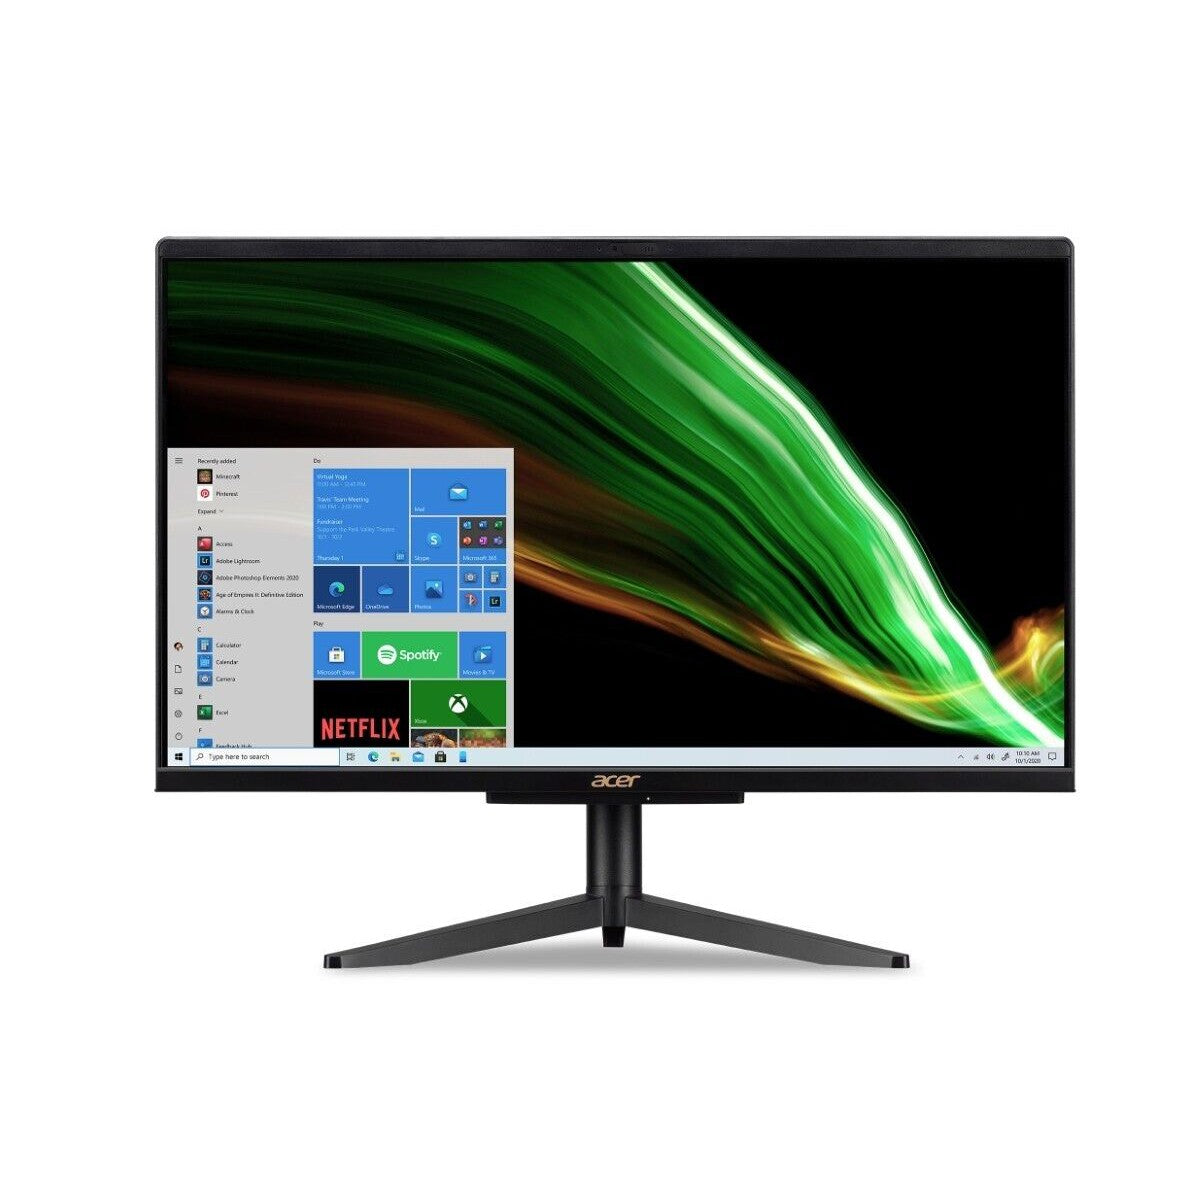 Acer All-in-One PC Aspire C22-1600 21.5in Intel Celeron 4GB Memory 256GB Storage